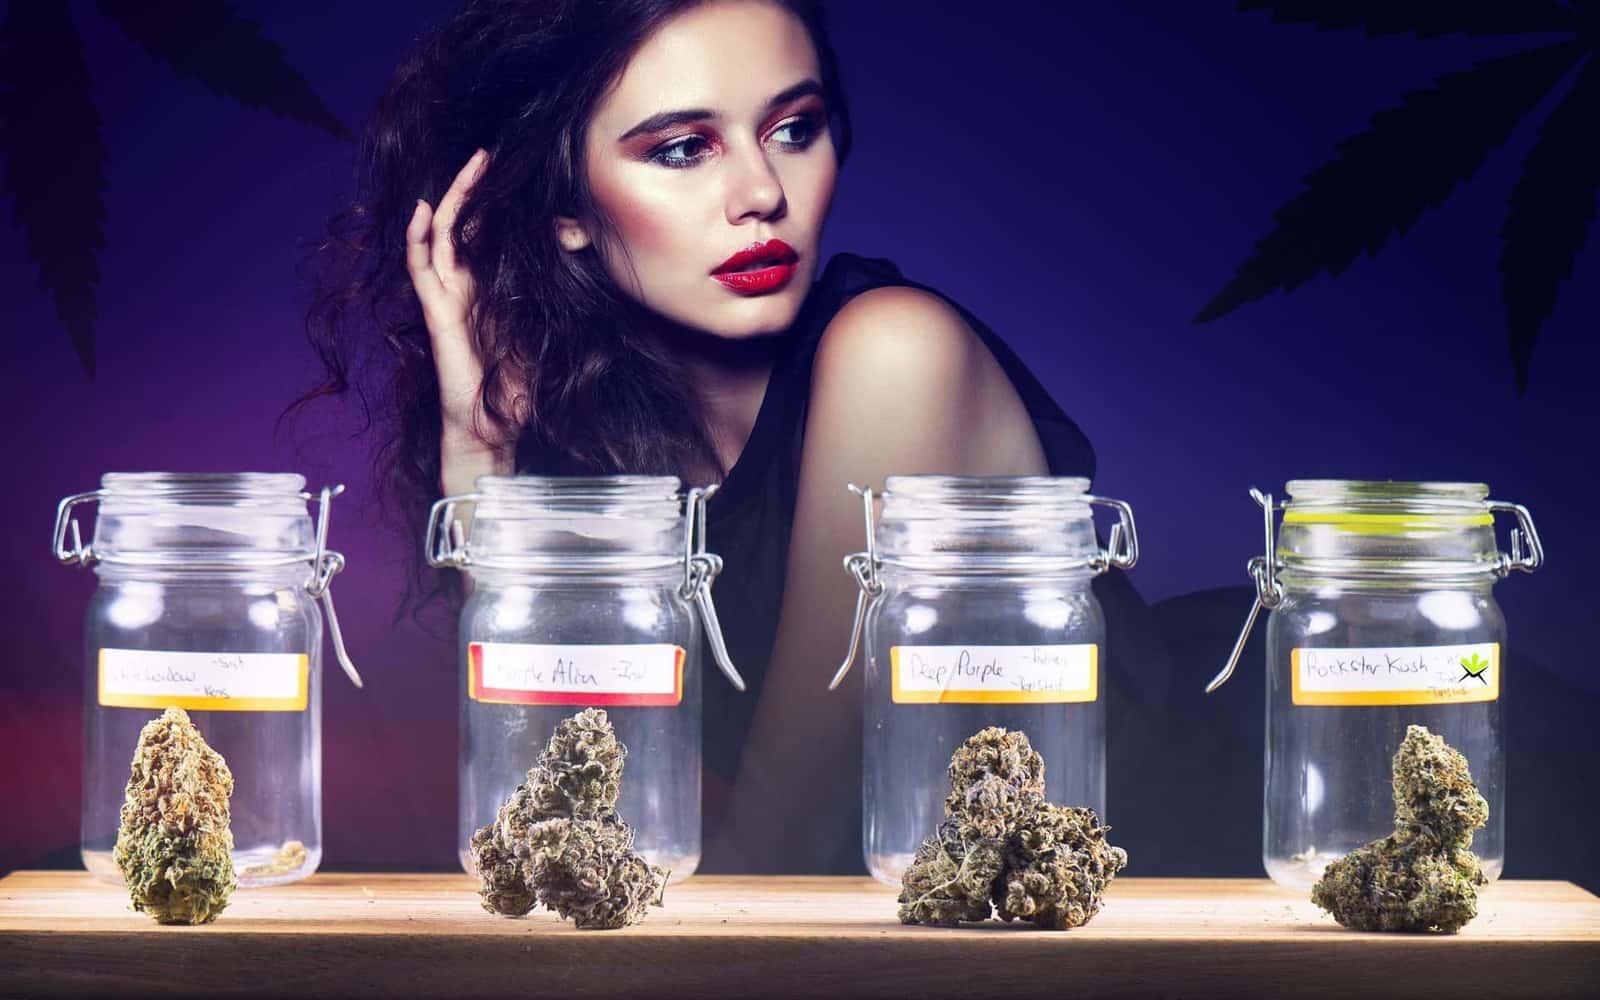 What It's Like to be a Female Weed Dealer